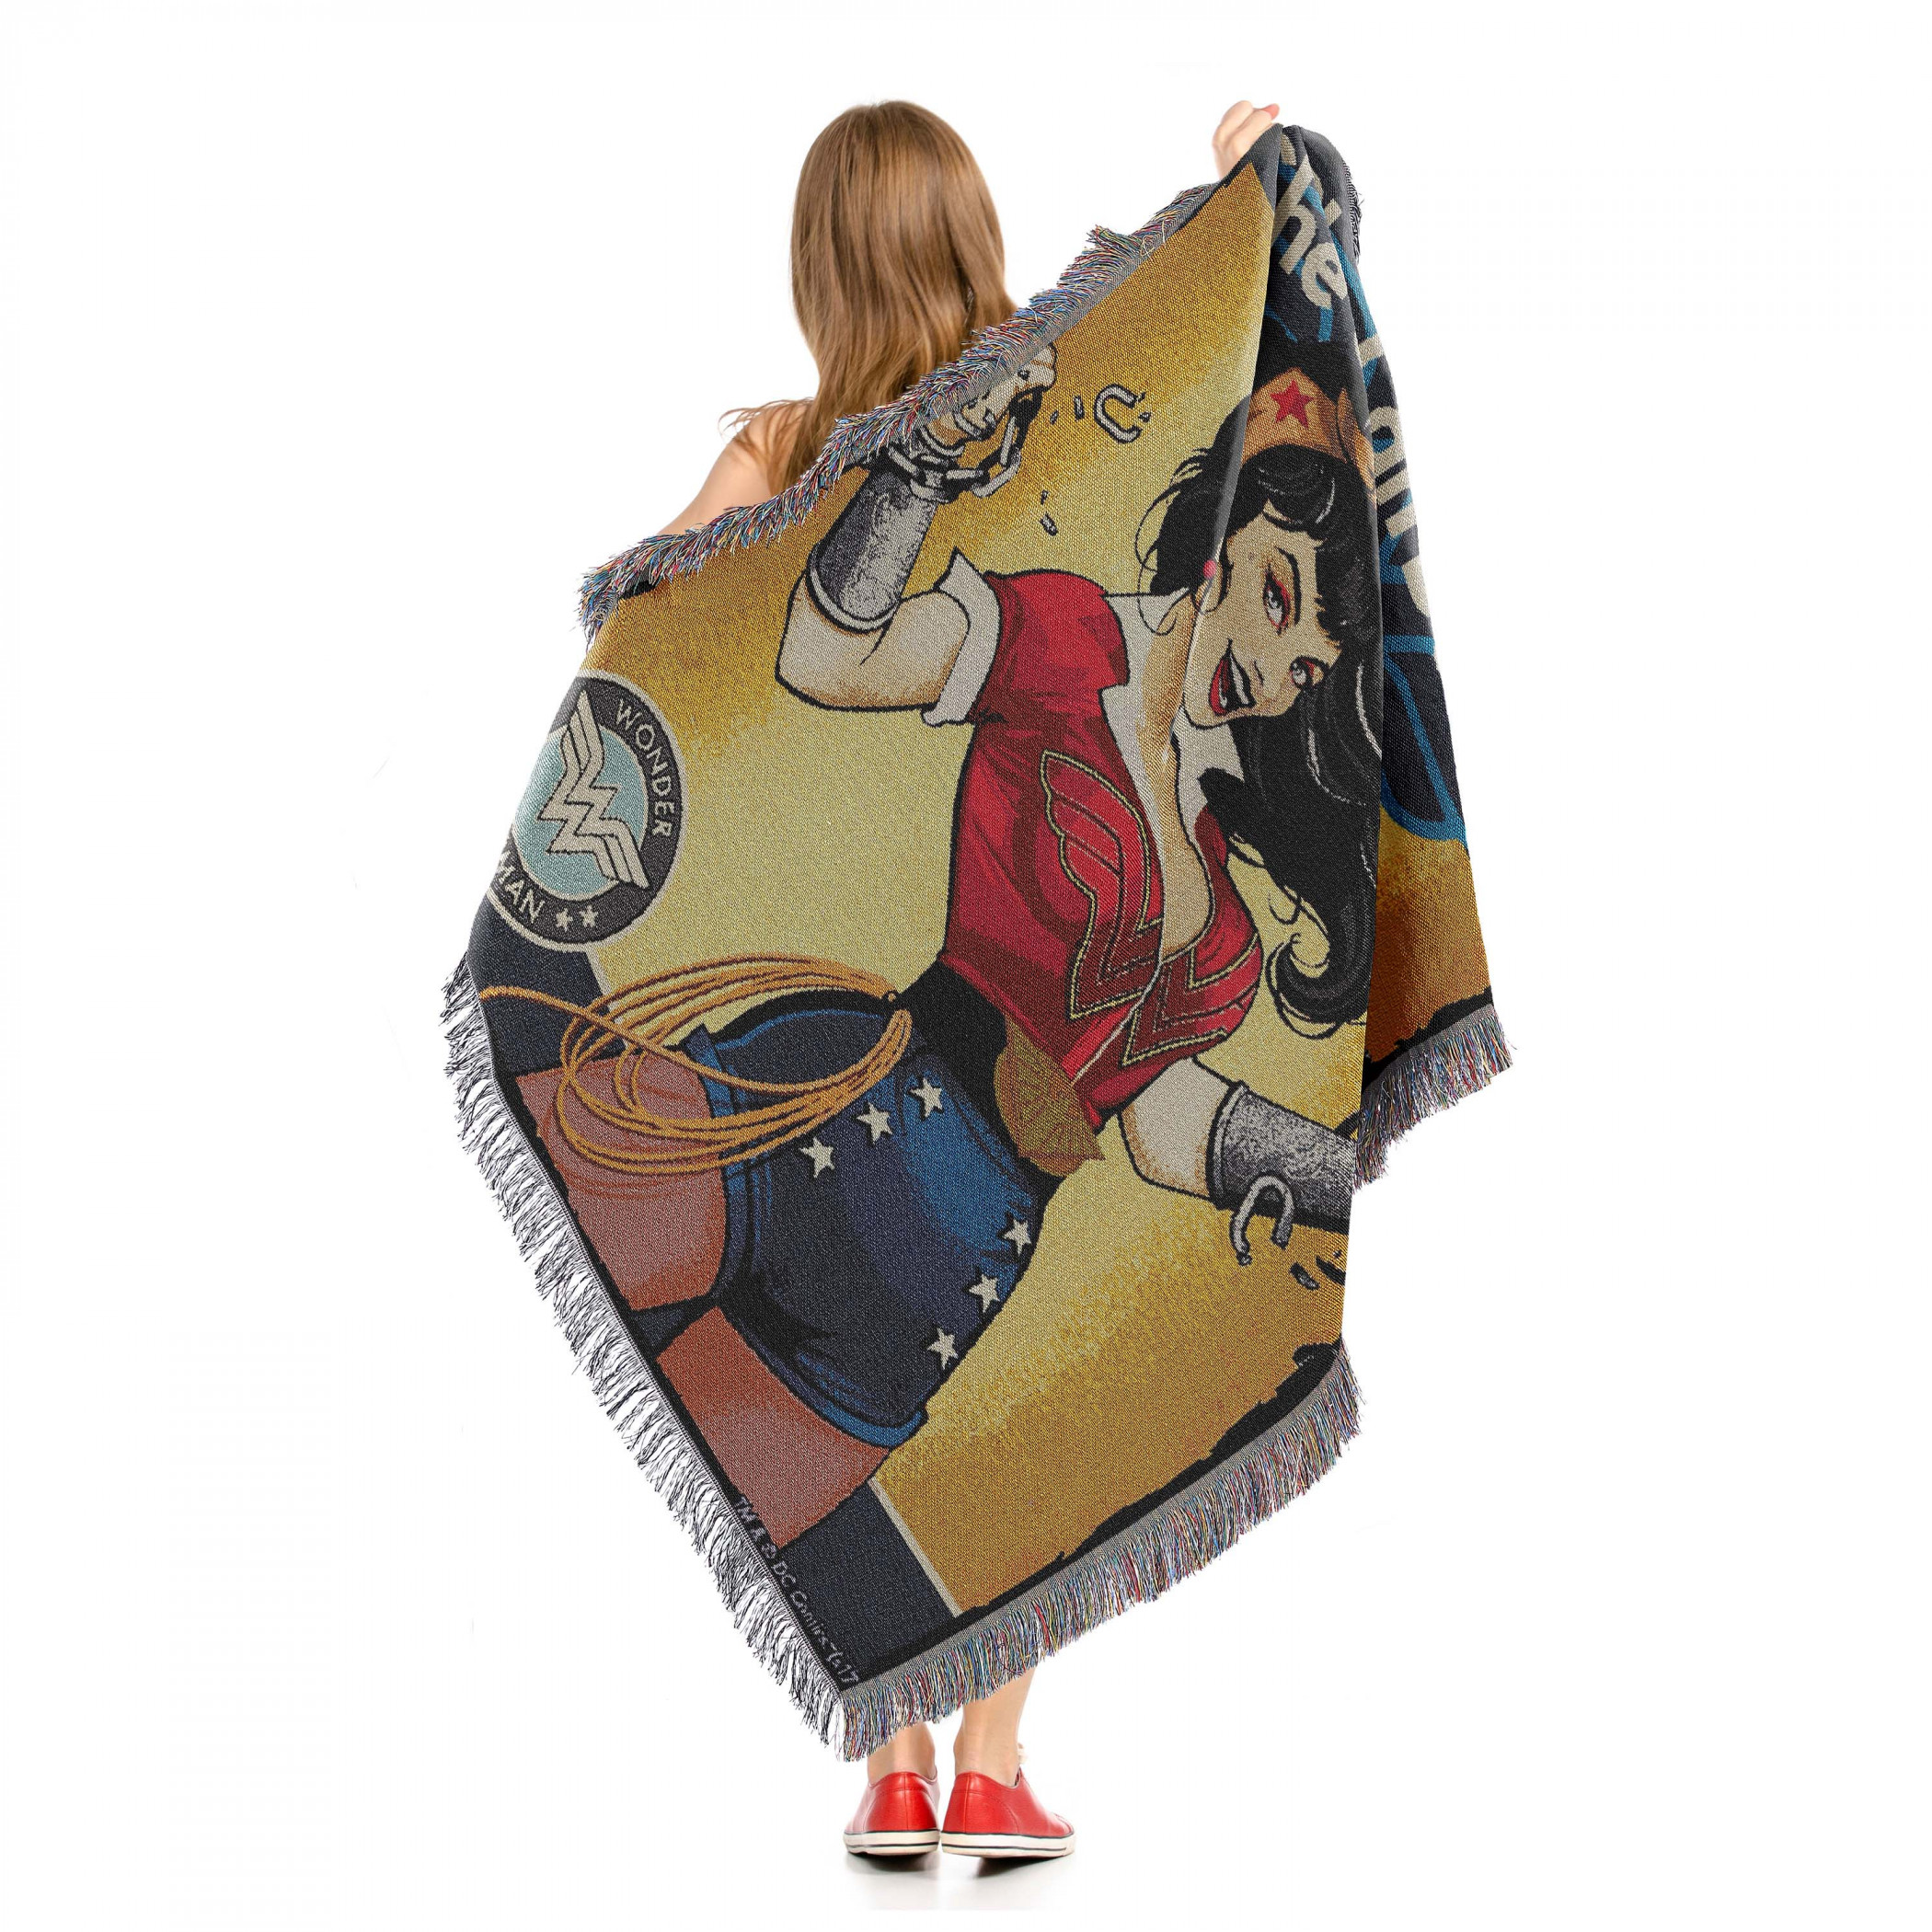 Wonder Woman She Can Do It Woven Tapestry Throw Blanket 48" x 60"